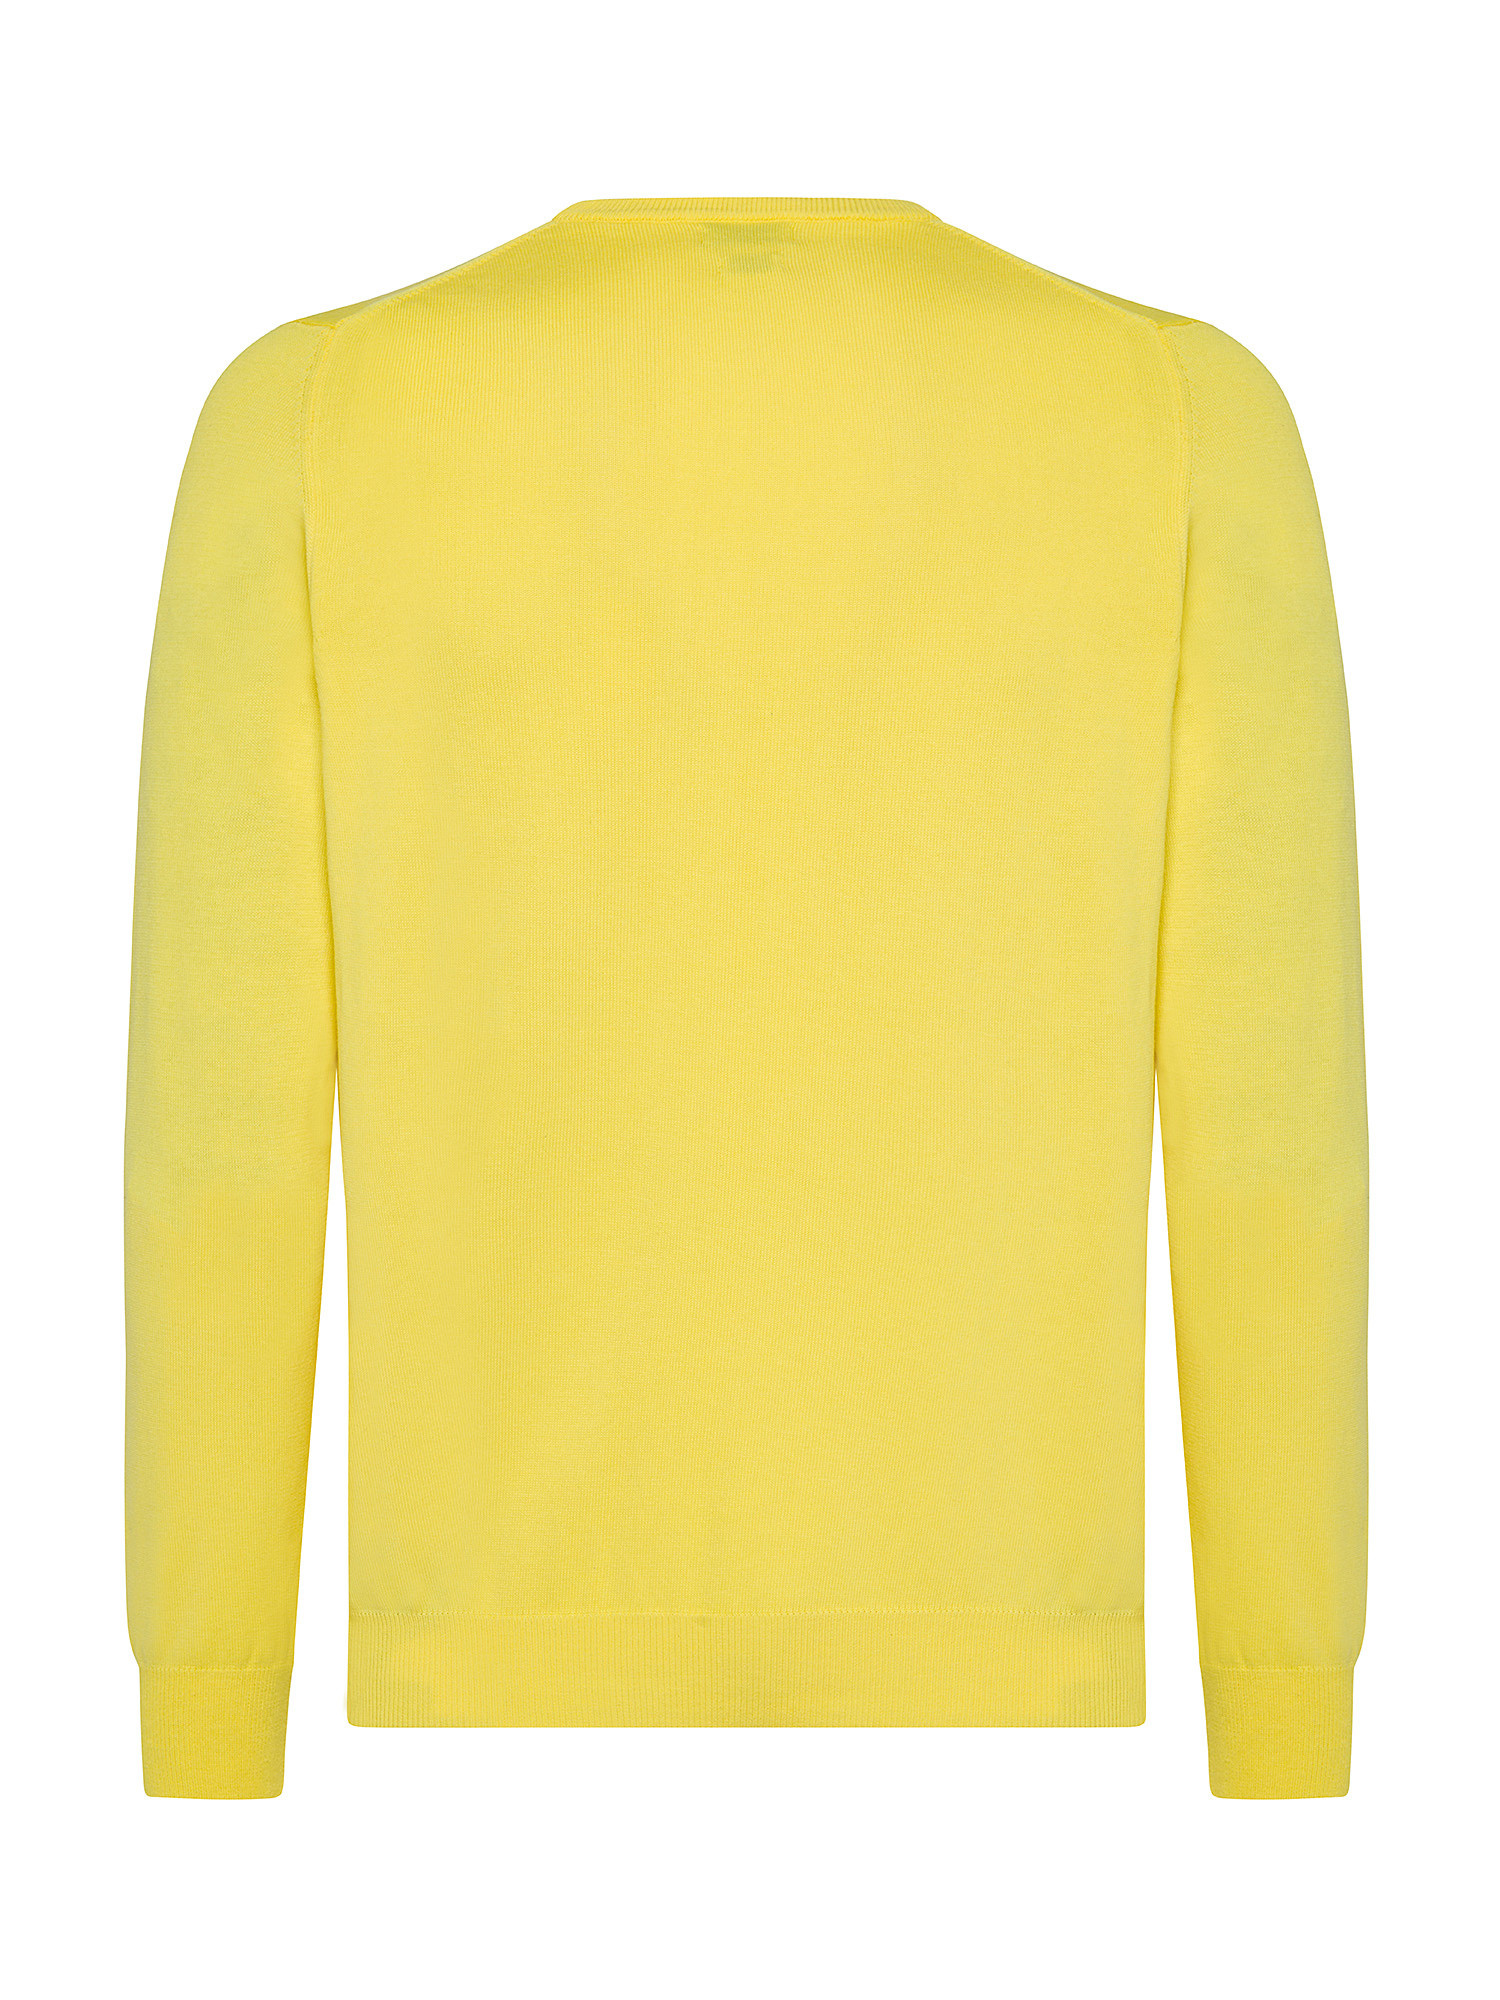 Luca D'Altieri - Crew neck sweater in extrafine pure cotton, Yellow, large image number 1